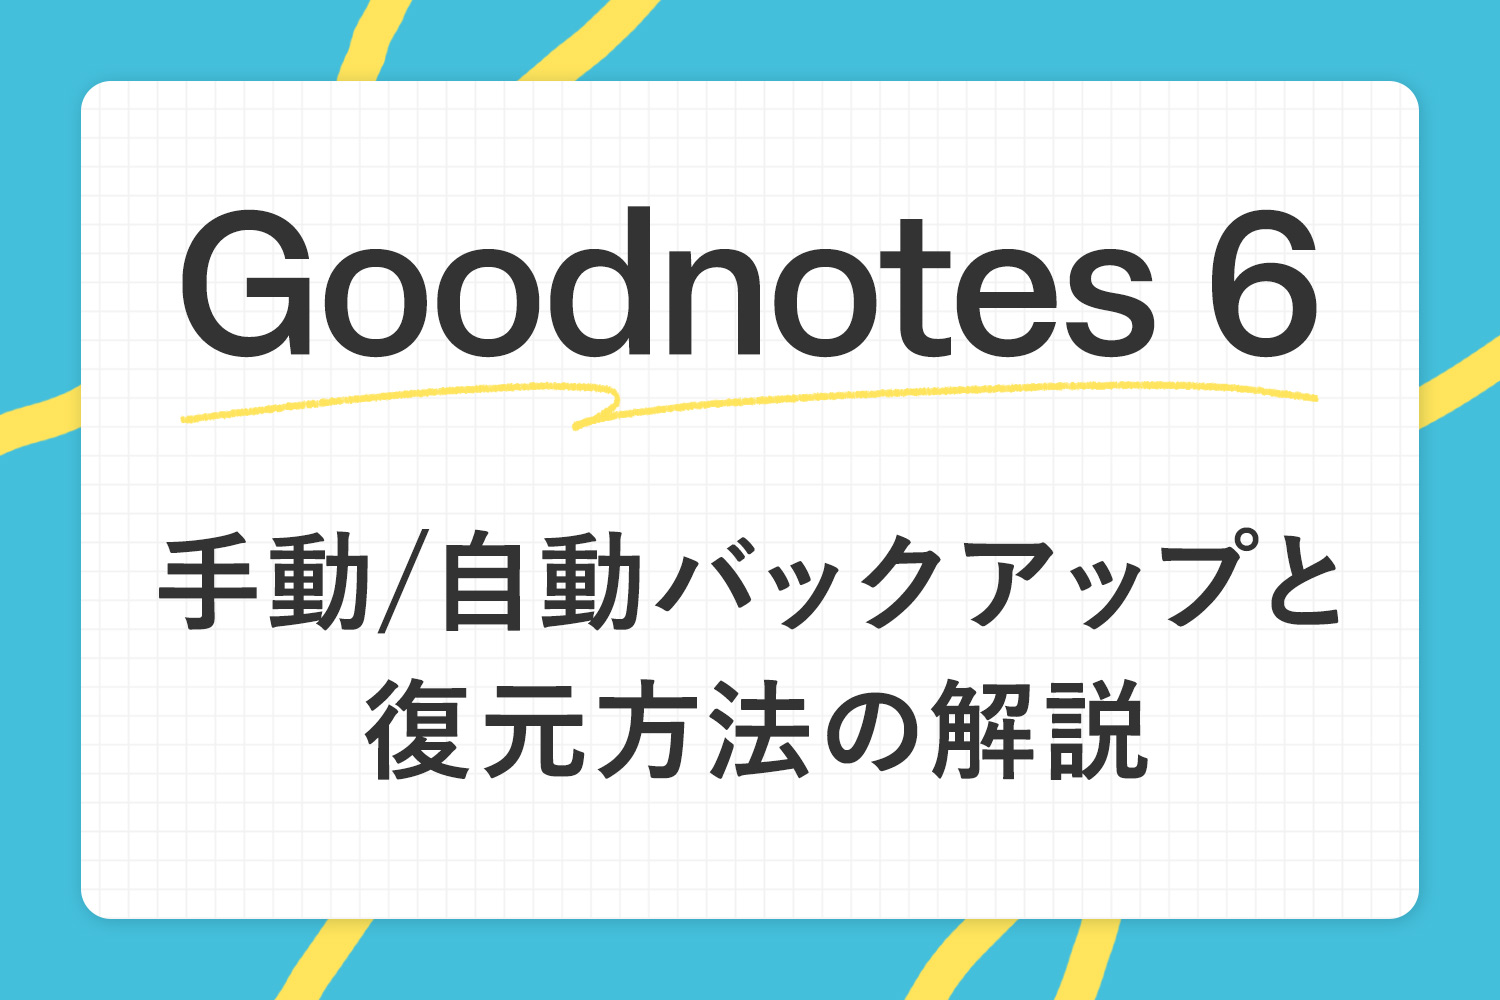 【Goodnotes 6】手動・自動バックアップと復元方法を解説